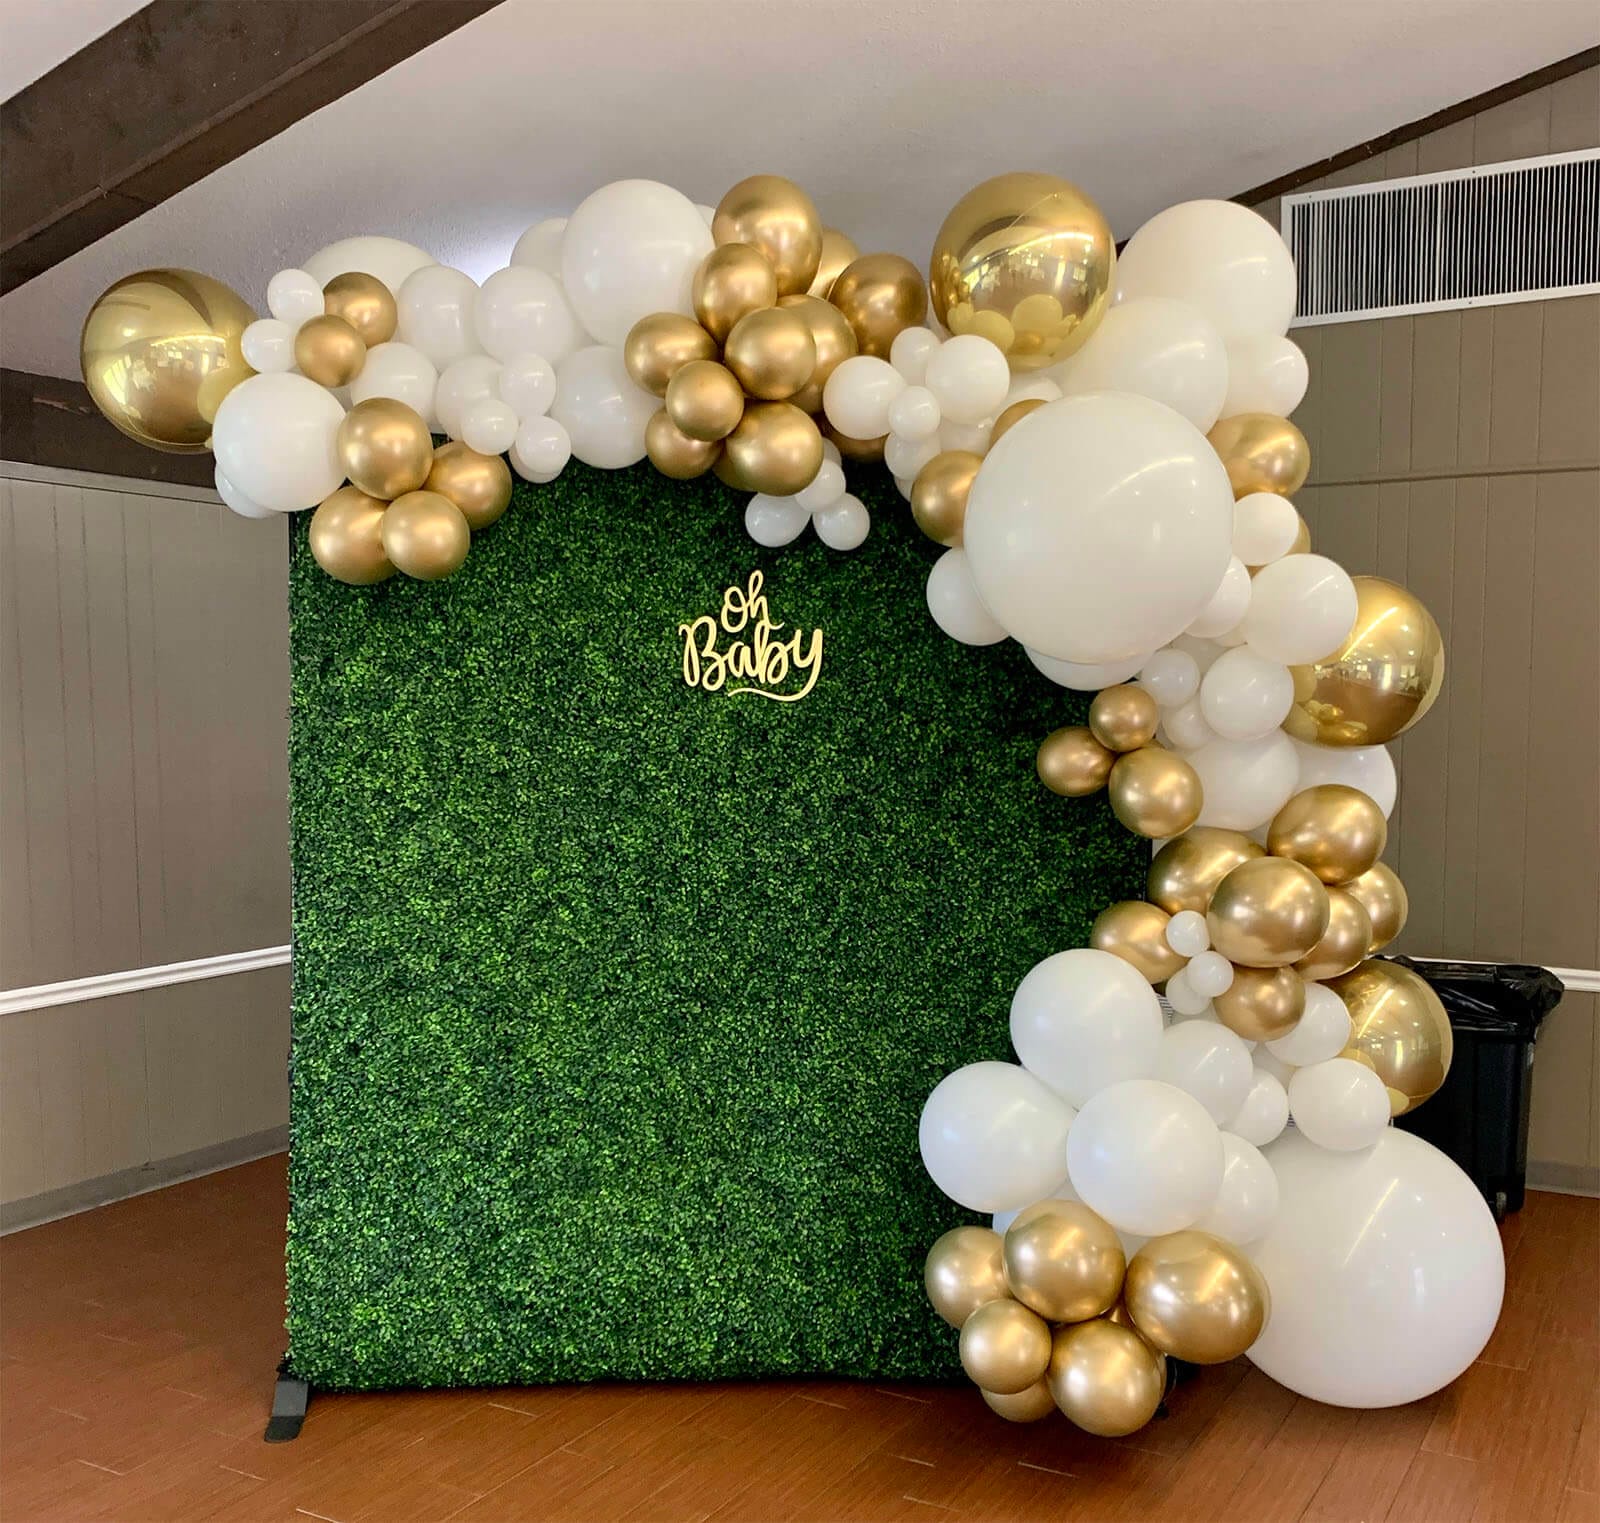 Rentable Boxwood Wall with Balloon Half Wrap from Just Peachy in Little Rock.